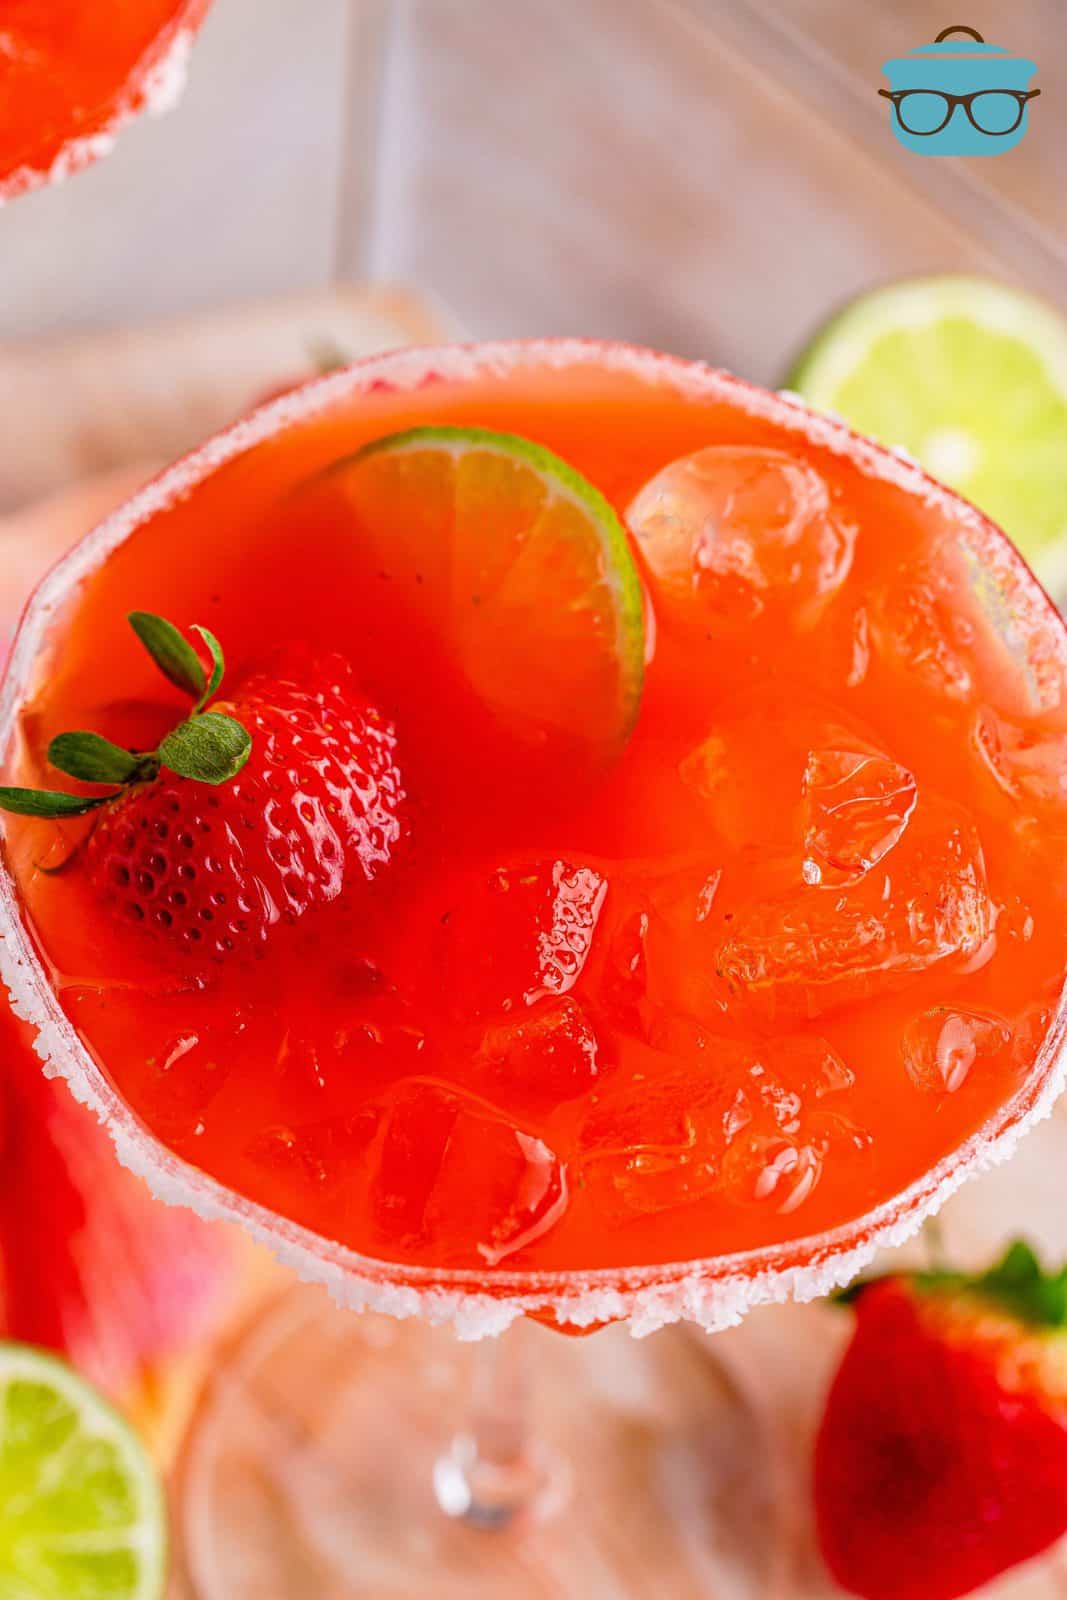 Overhead of one of the Strawberry Margaritas showing garnishes.